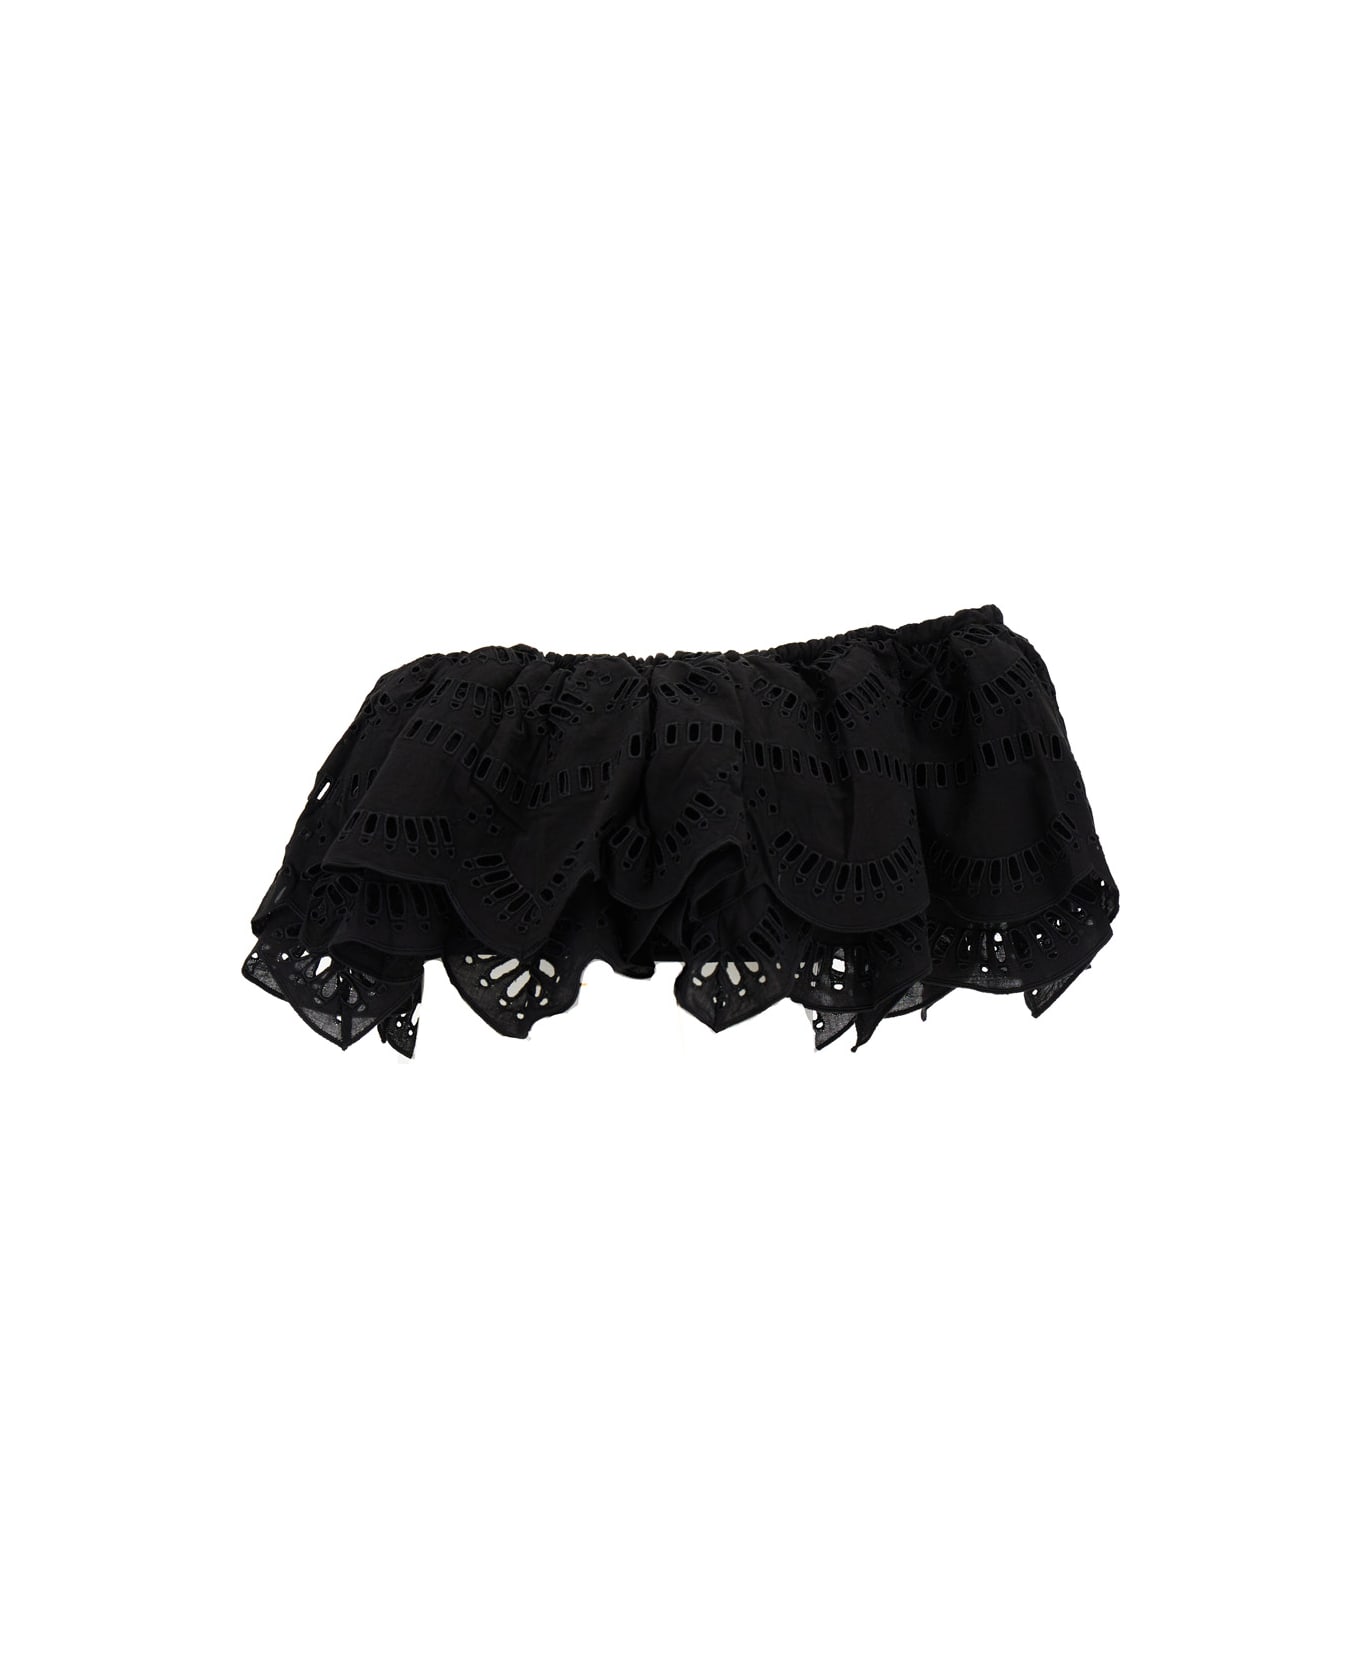 Charo Ruiz 'collyk' Black Off-the-shoulders Top In Cotton Lace Woman - Black トップス